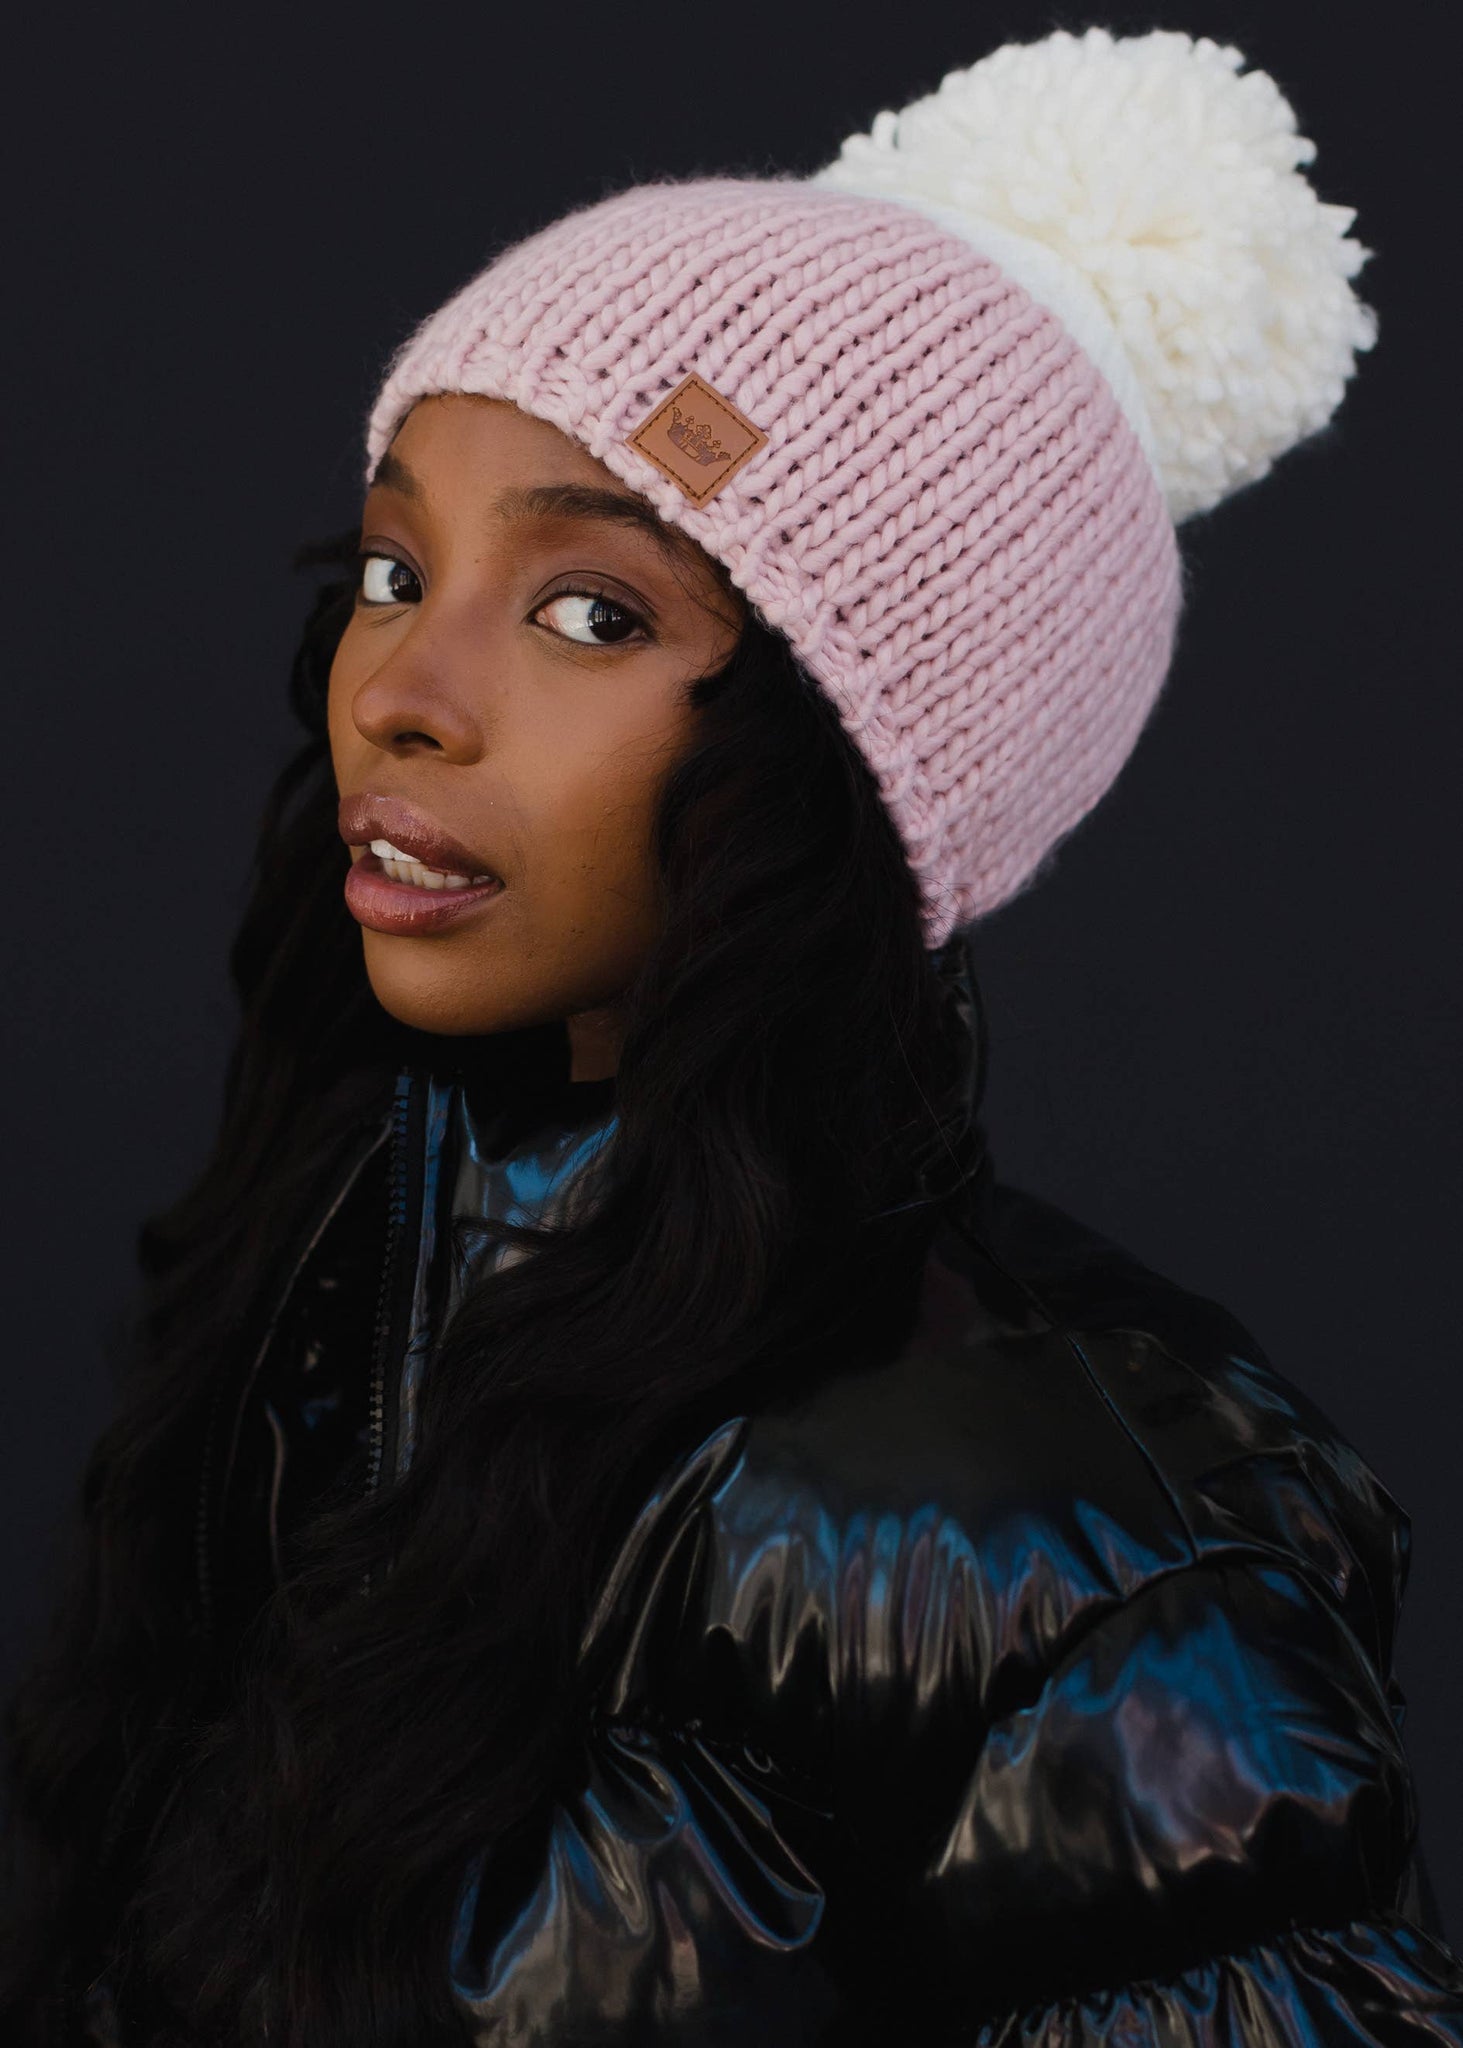 Pink & White Color Block Pom Beanie